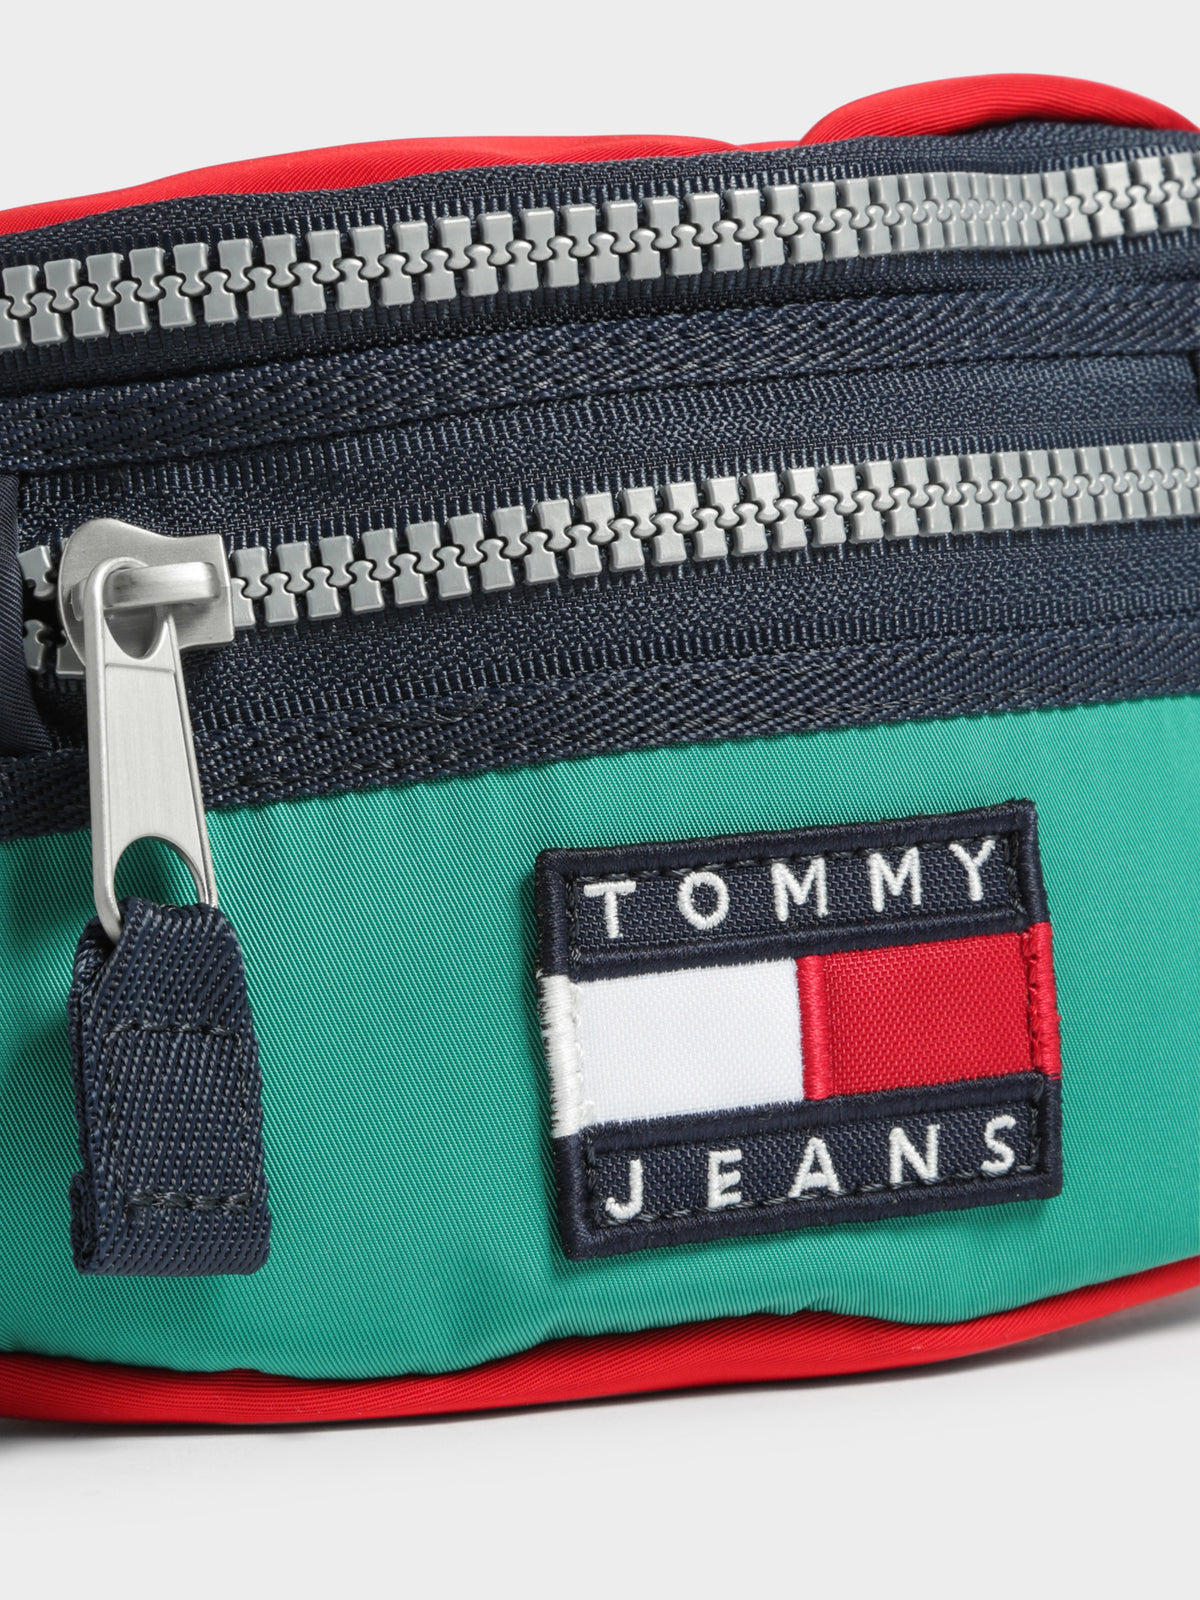 TJM Heritage Bumbag in Midwest Blue